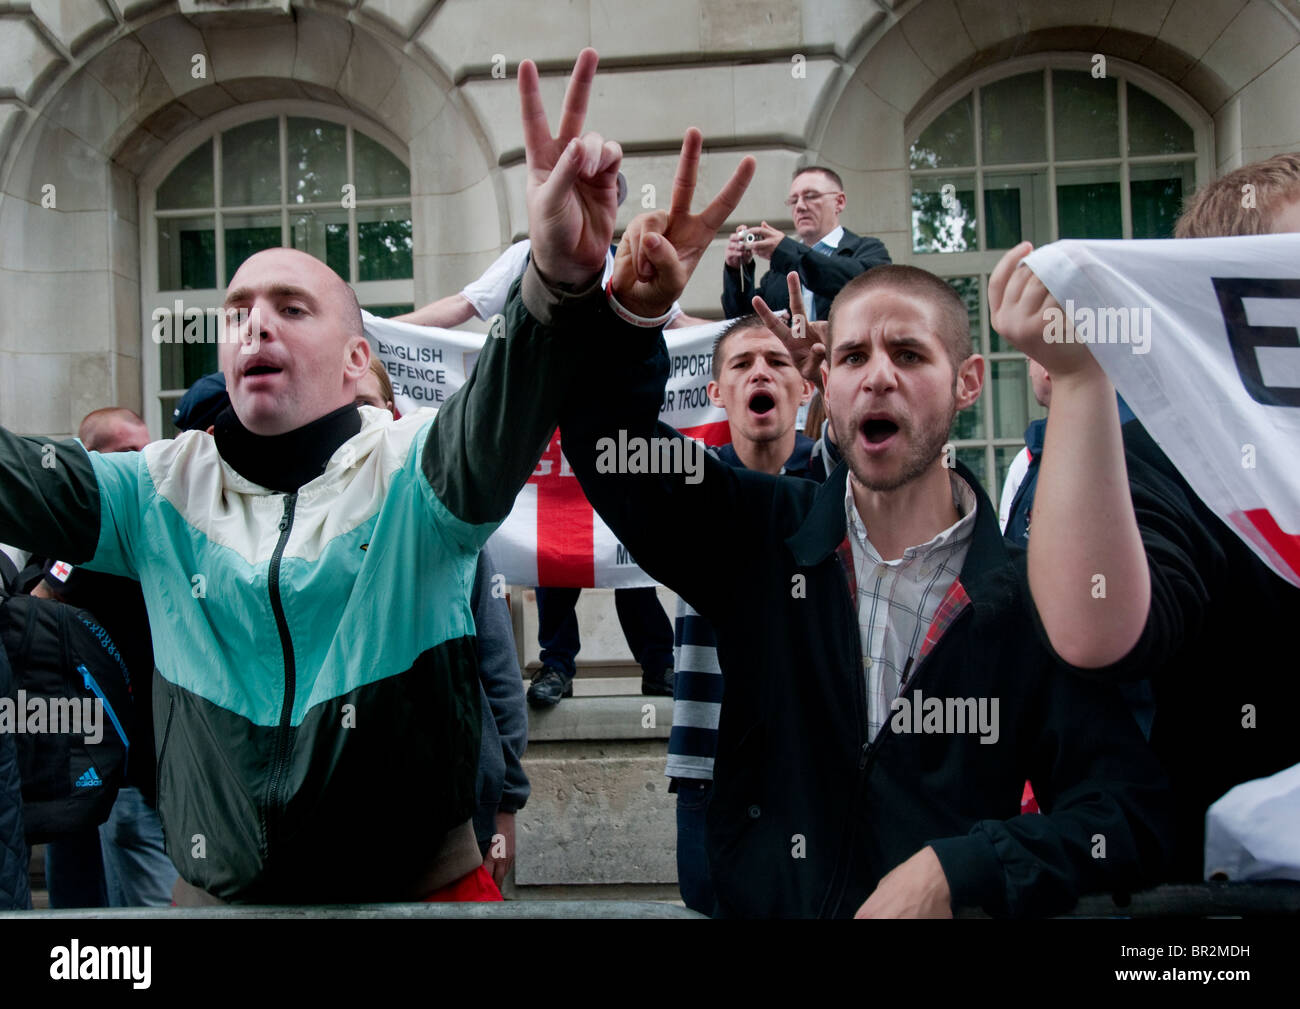 Members of The English Defence League EDL an extreme right wing Islamophobic group protest at the US Embassy on 9/11 2010. Stock Photo